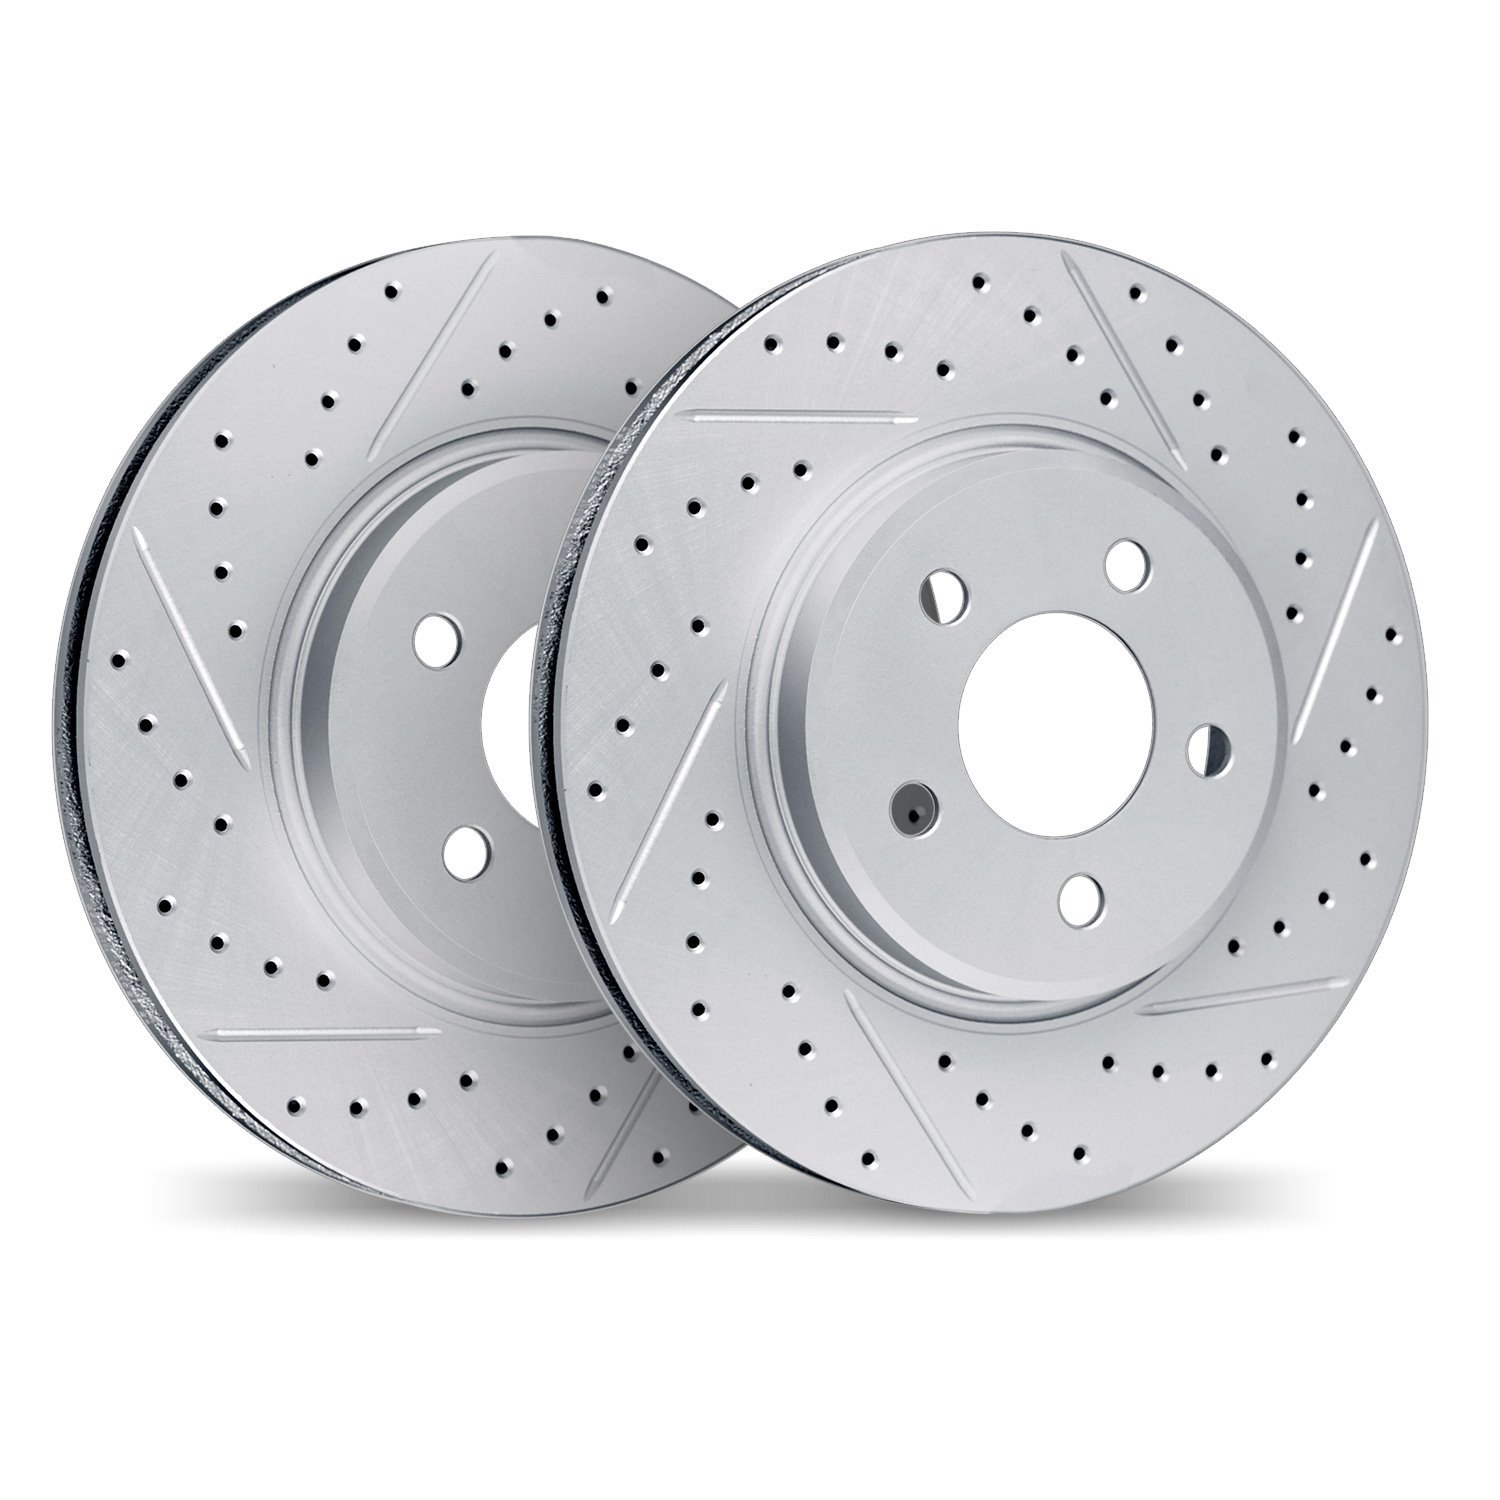 2002-54116 Geoperformance Drilled/Slotted Brake Rotors, 1999-2003 Ford/Lincoln/Mercury/Mazda, Position: Front